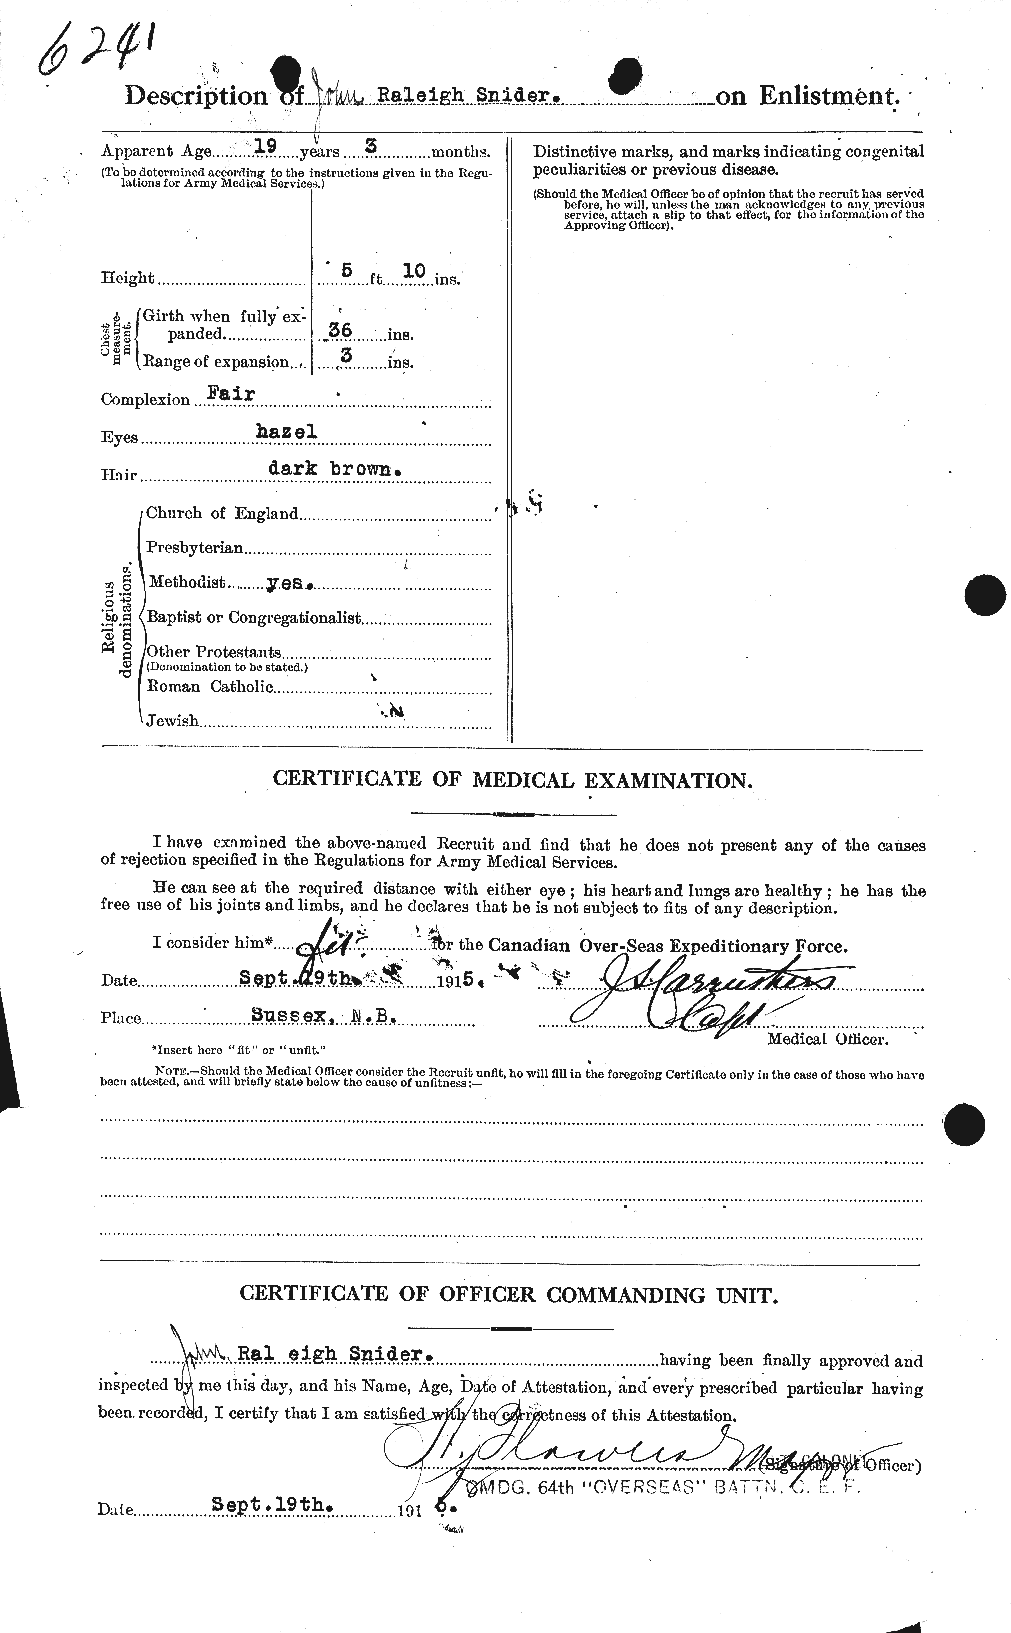 Personnel Records of the First World War - CEF 110005b